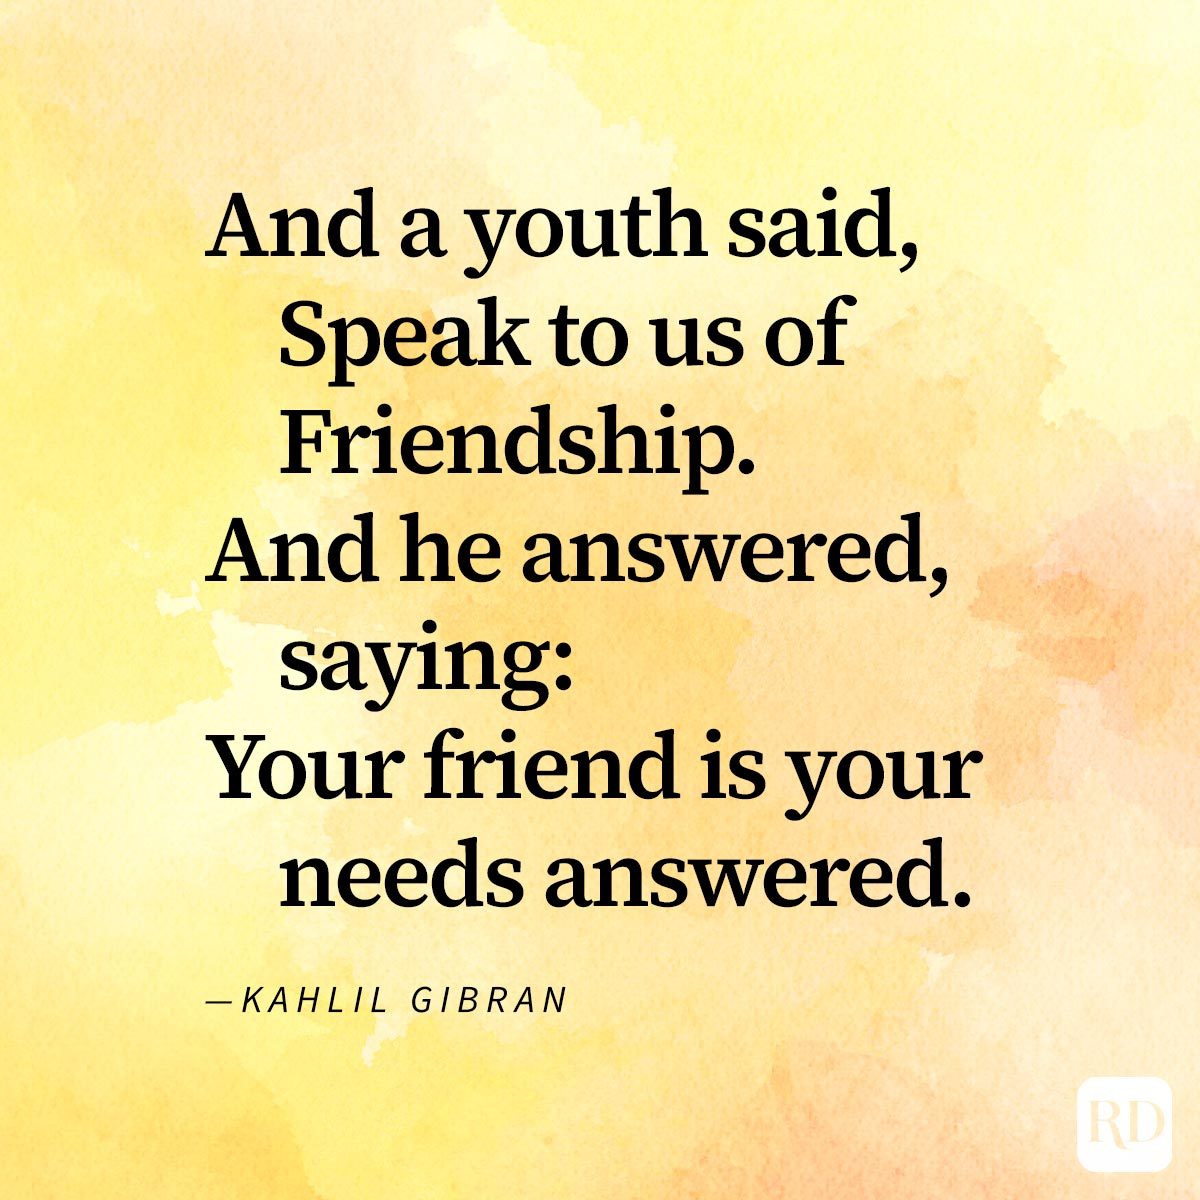 Excerpt from poem About Friendship To Share With Your BFF on watercolour background